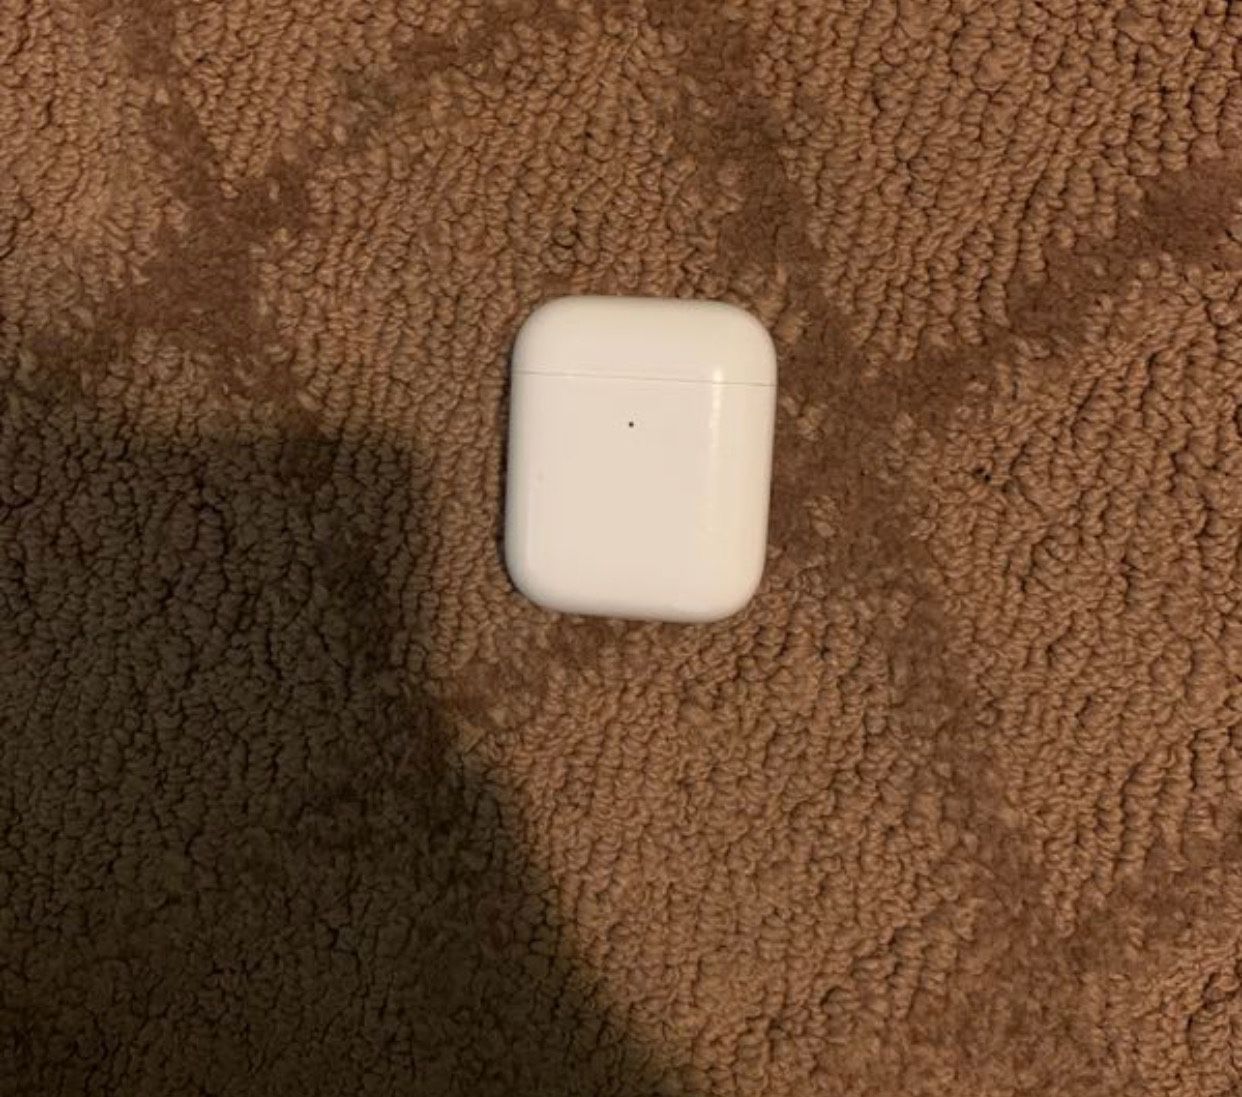 Airpods 2’s